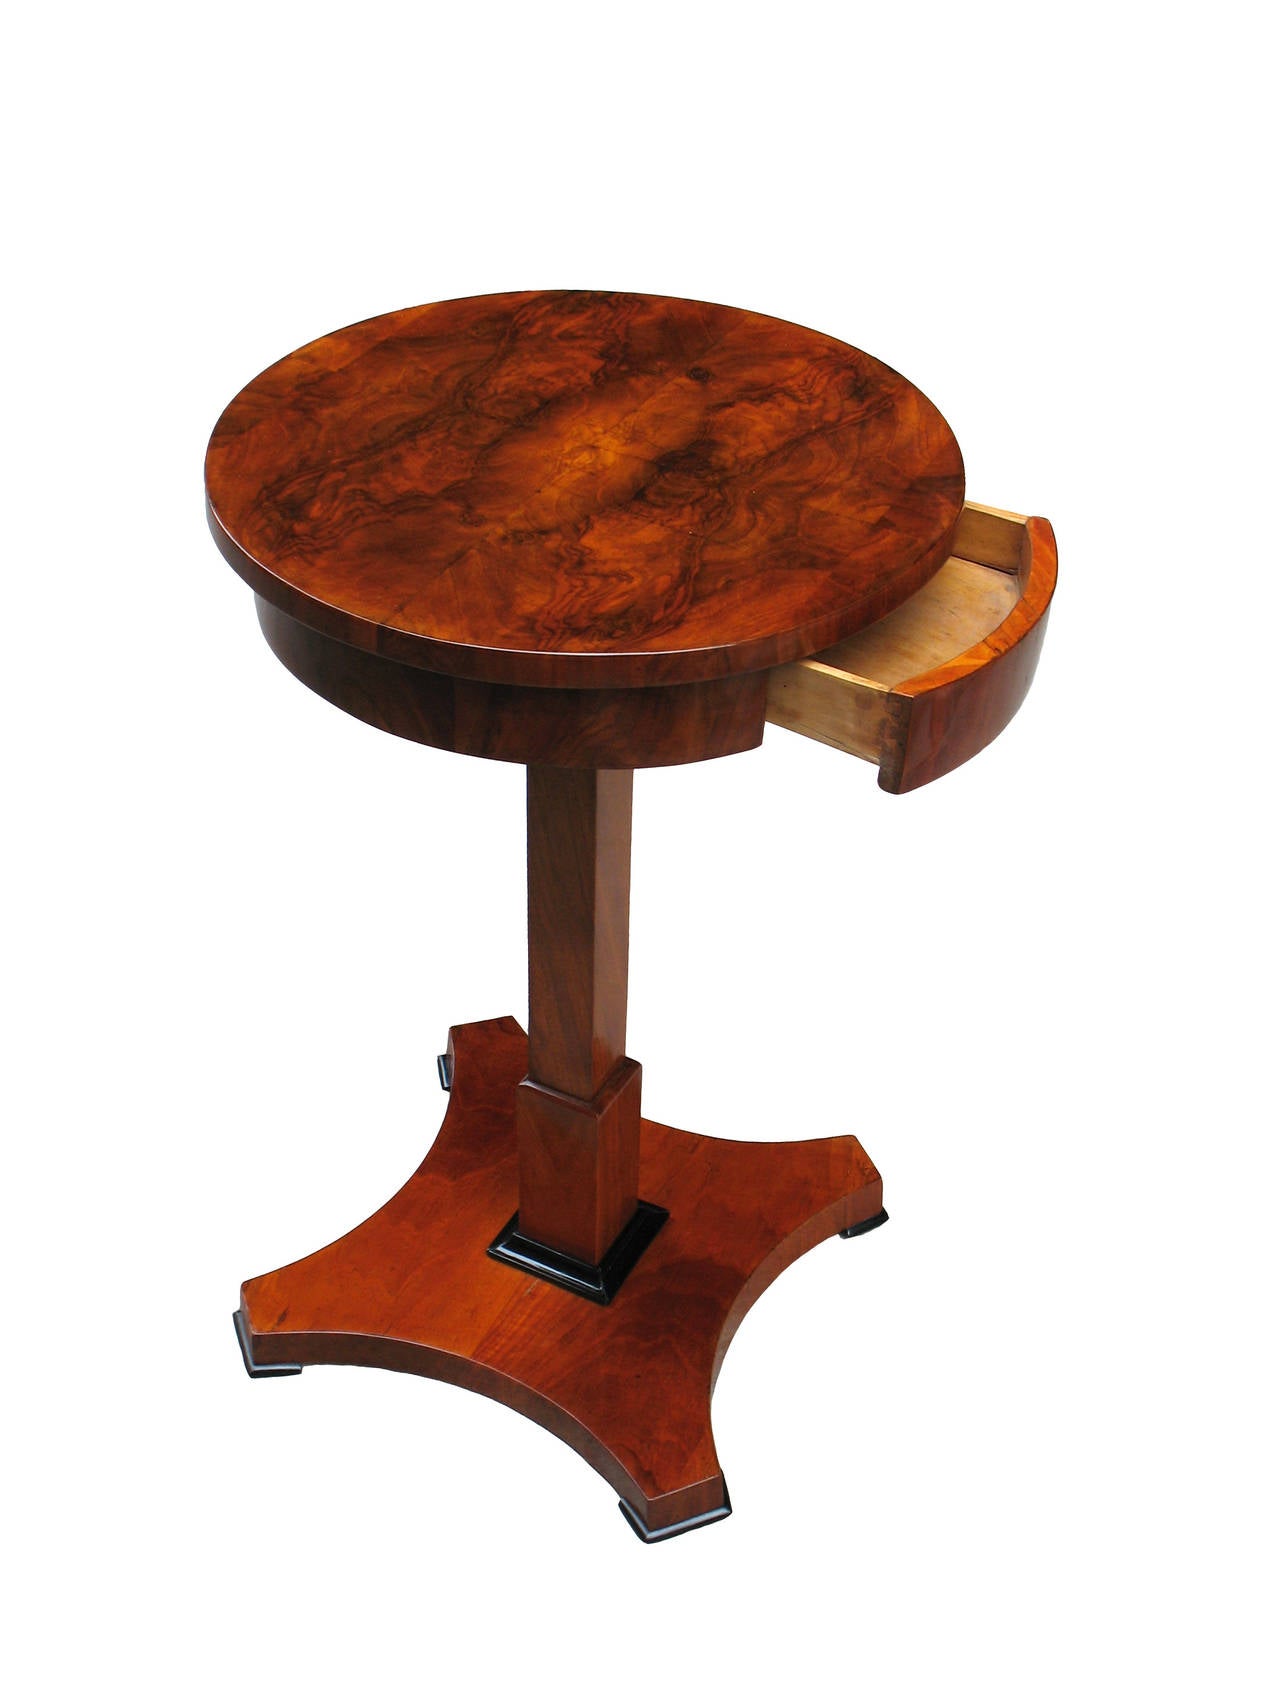 This South German Biedermeier side table is veneered with walnut on pine, book match on table-top. One drawer apron raised on a square pedestal over plinth on a four times concave shaped base. Ebonized trim.

References are included in our